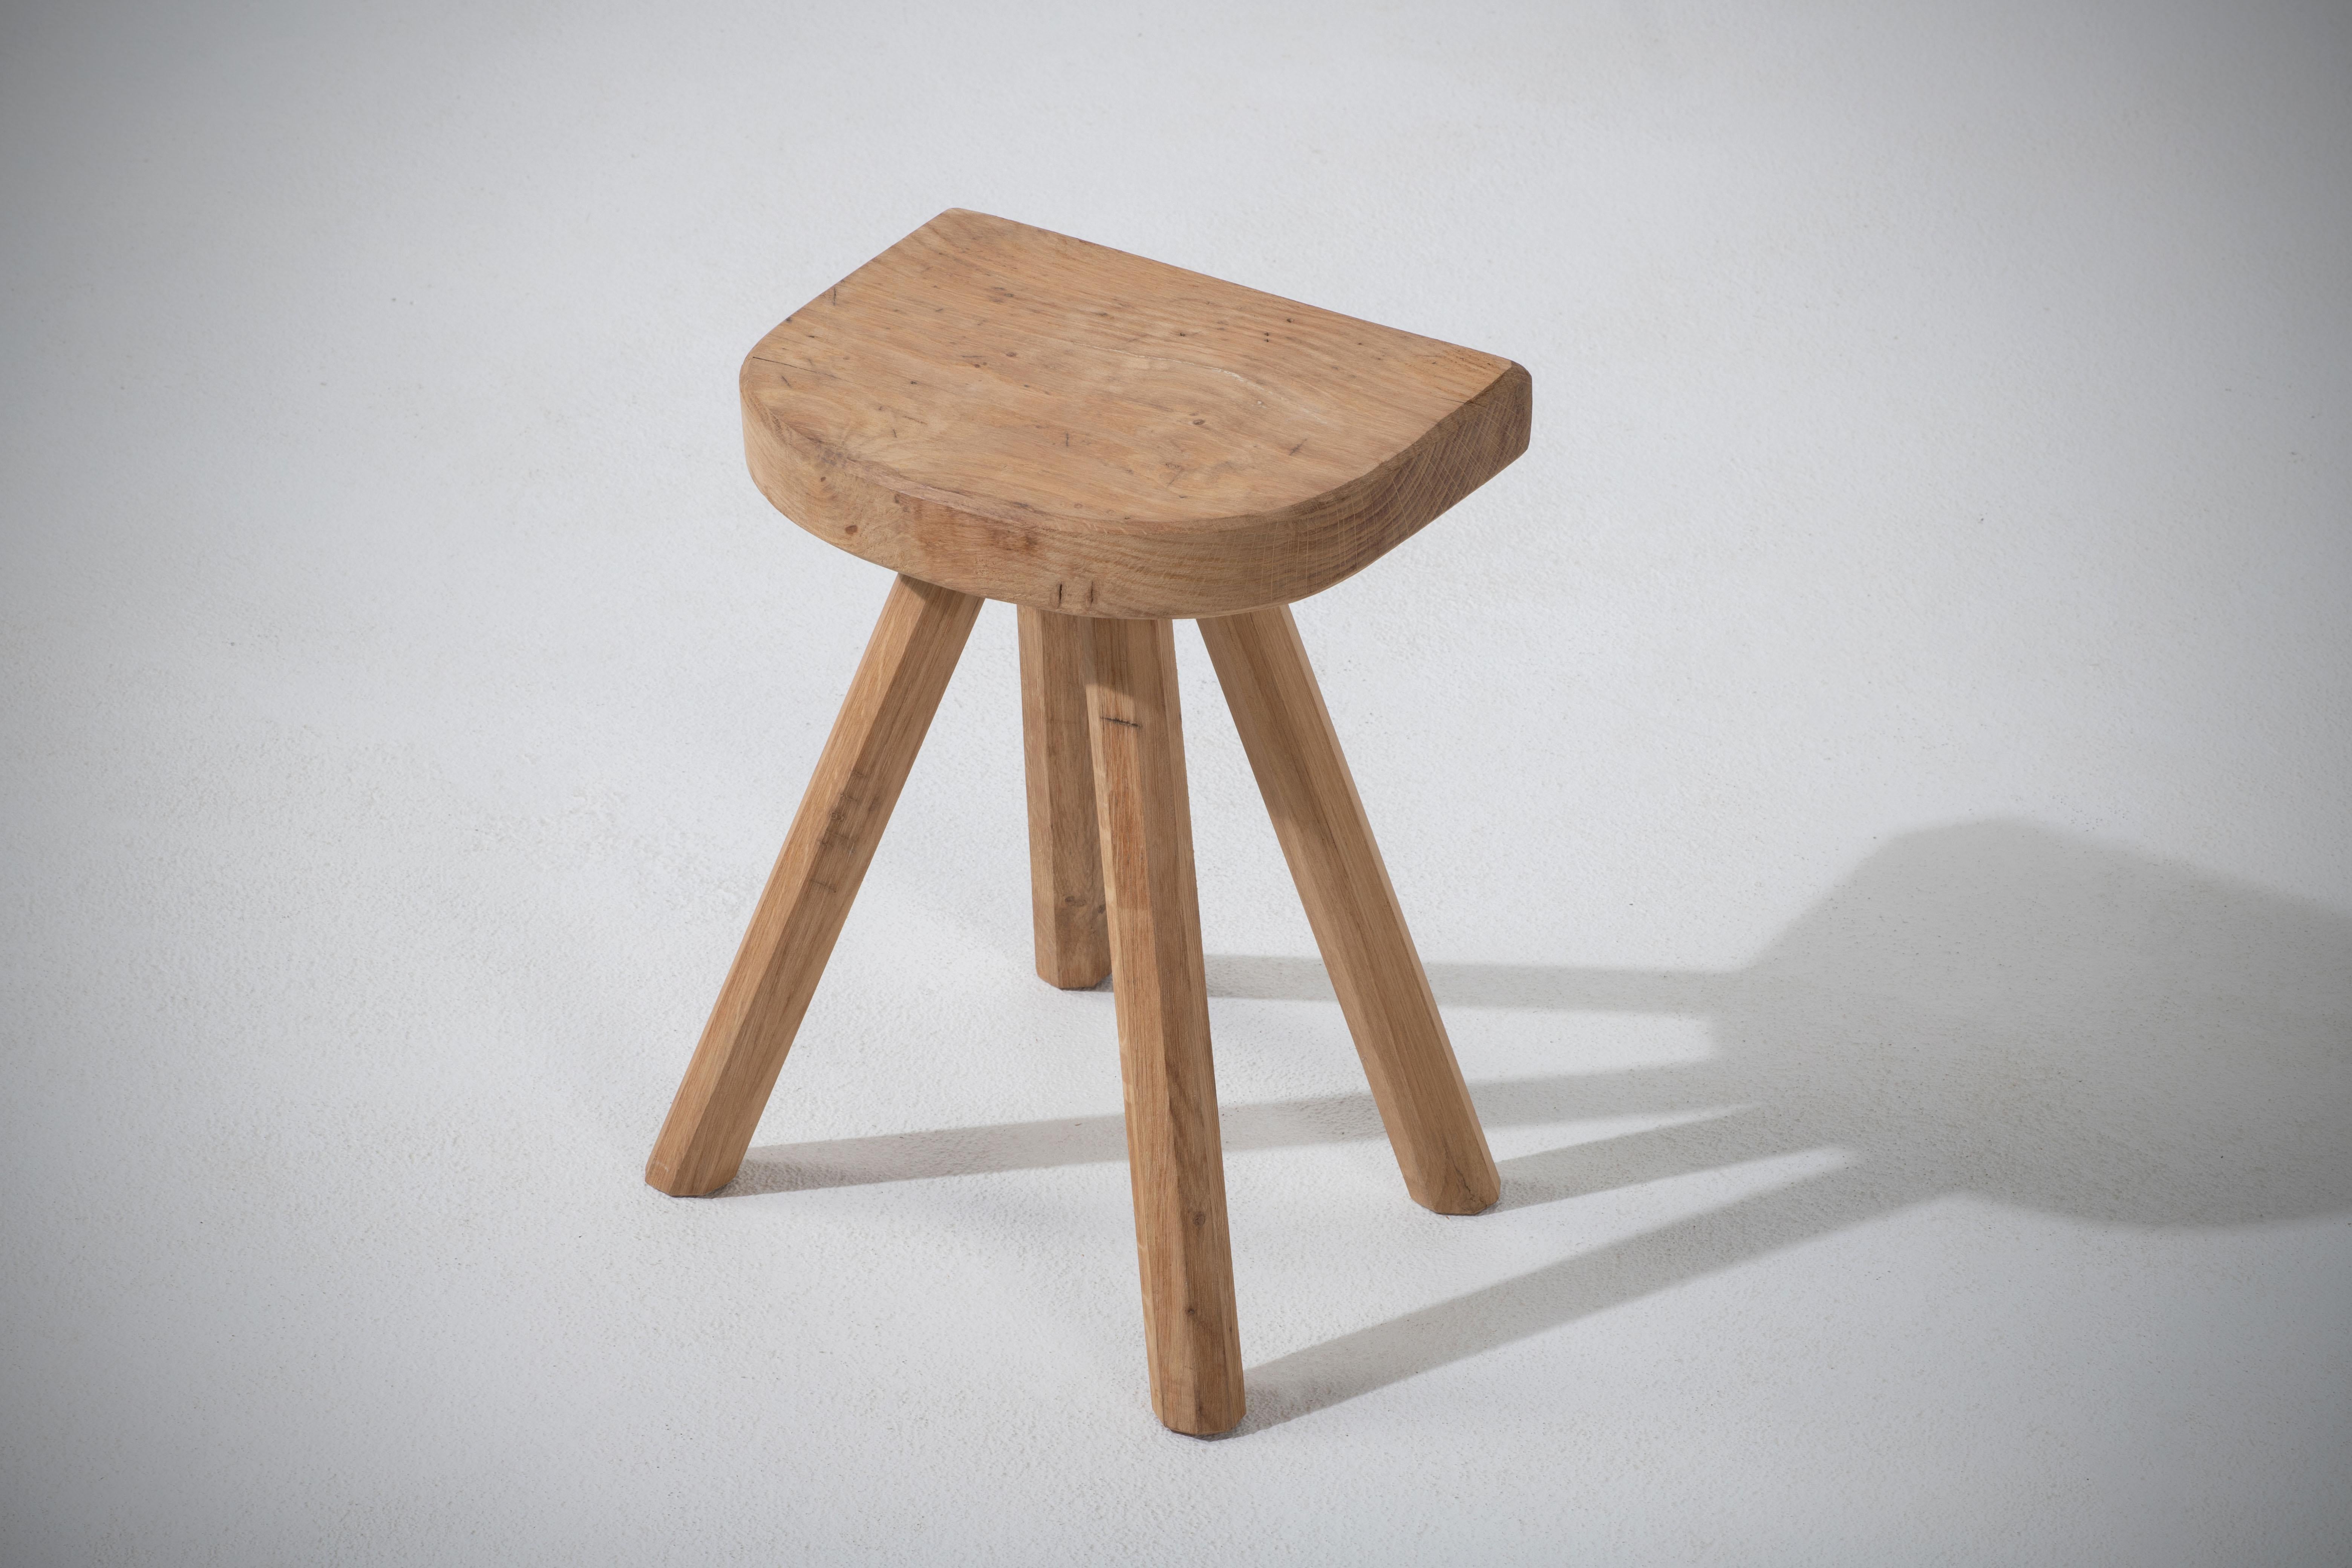 French Midcentury Oak Stool, Tripod Flared Feet, 1920s For Sale 2